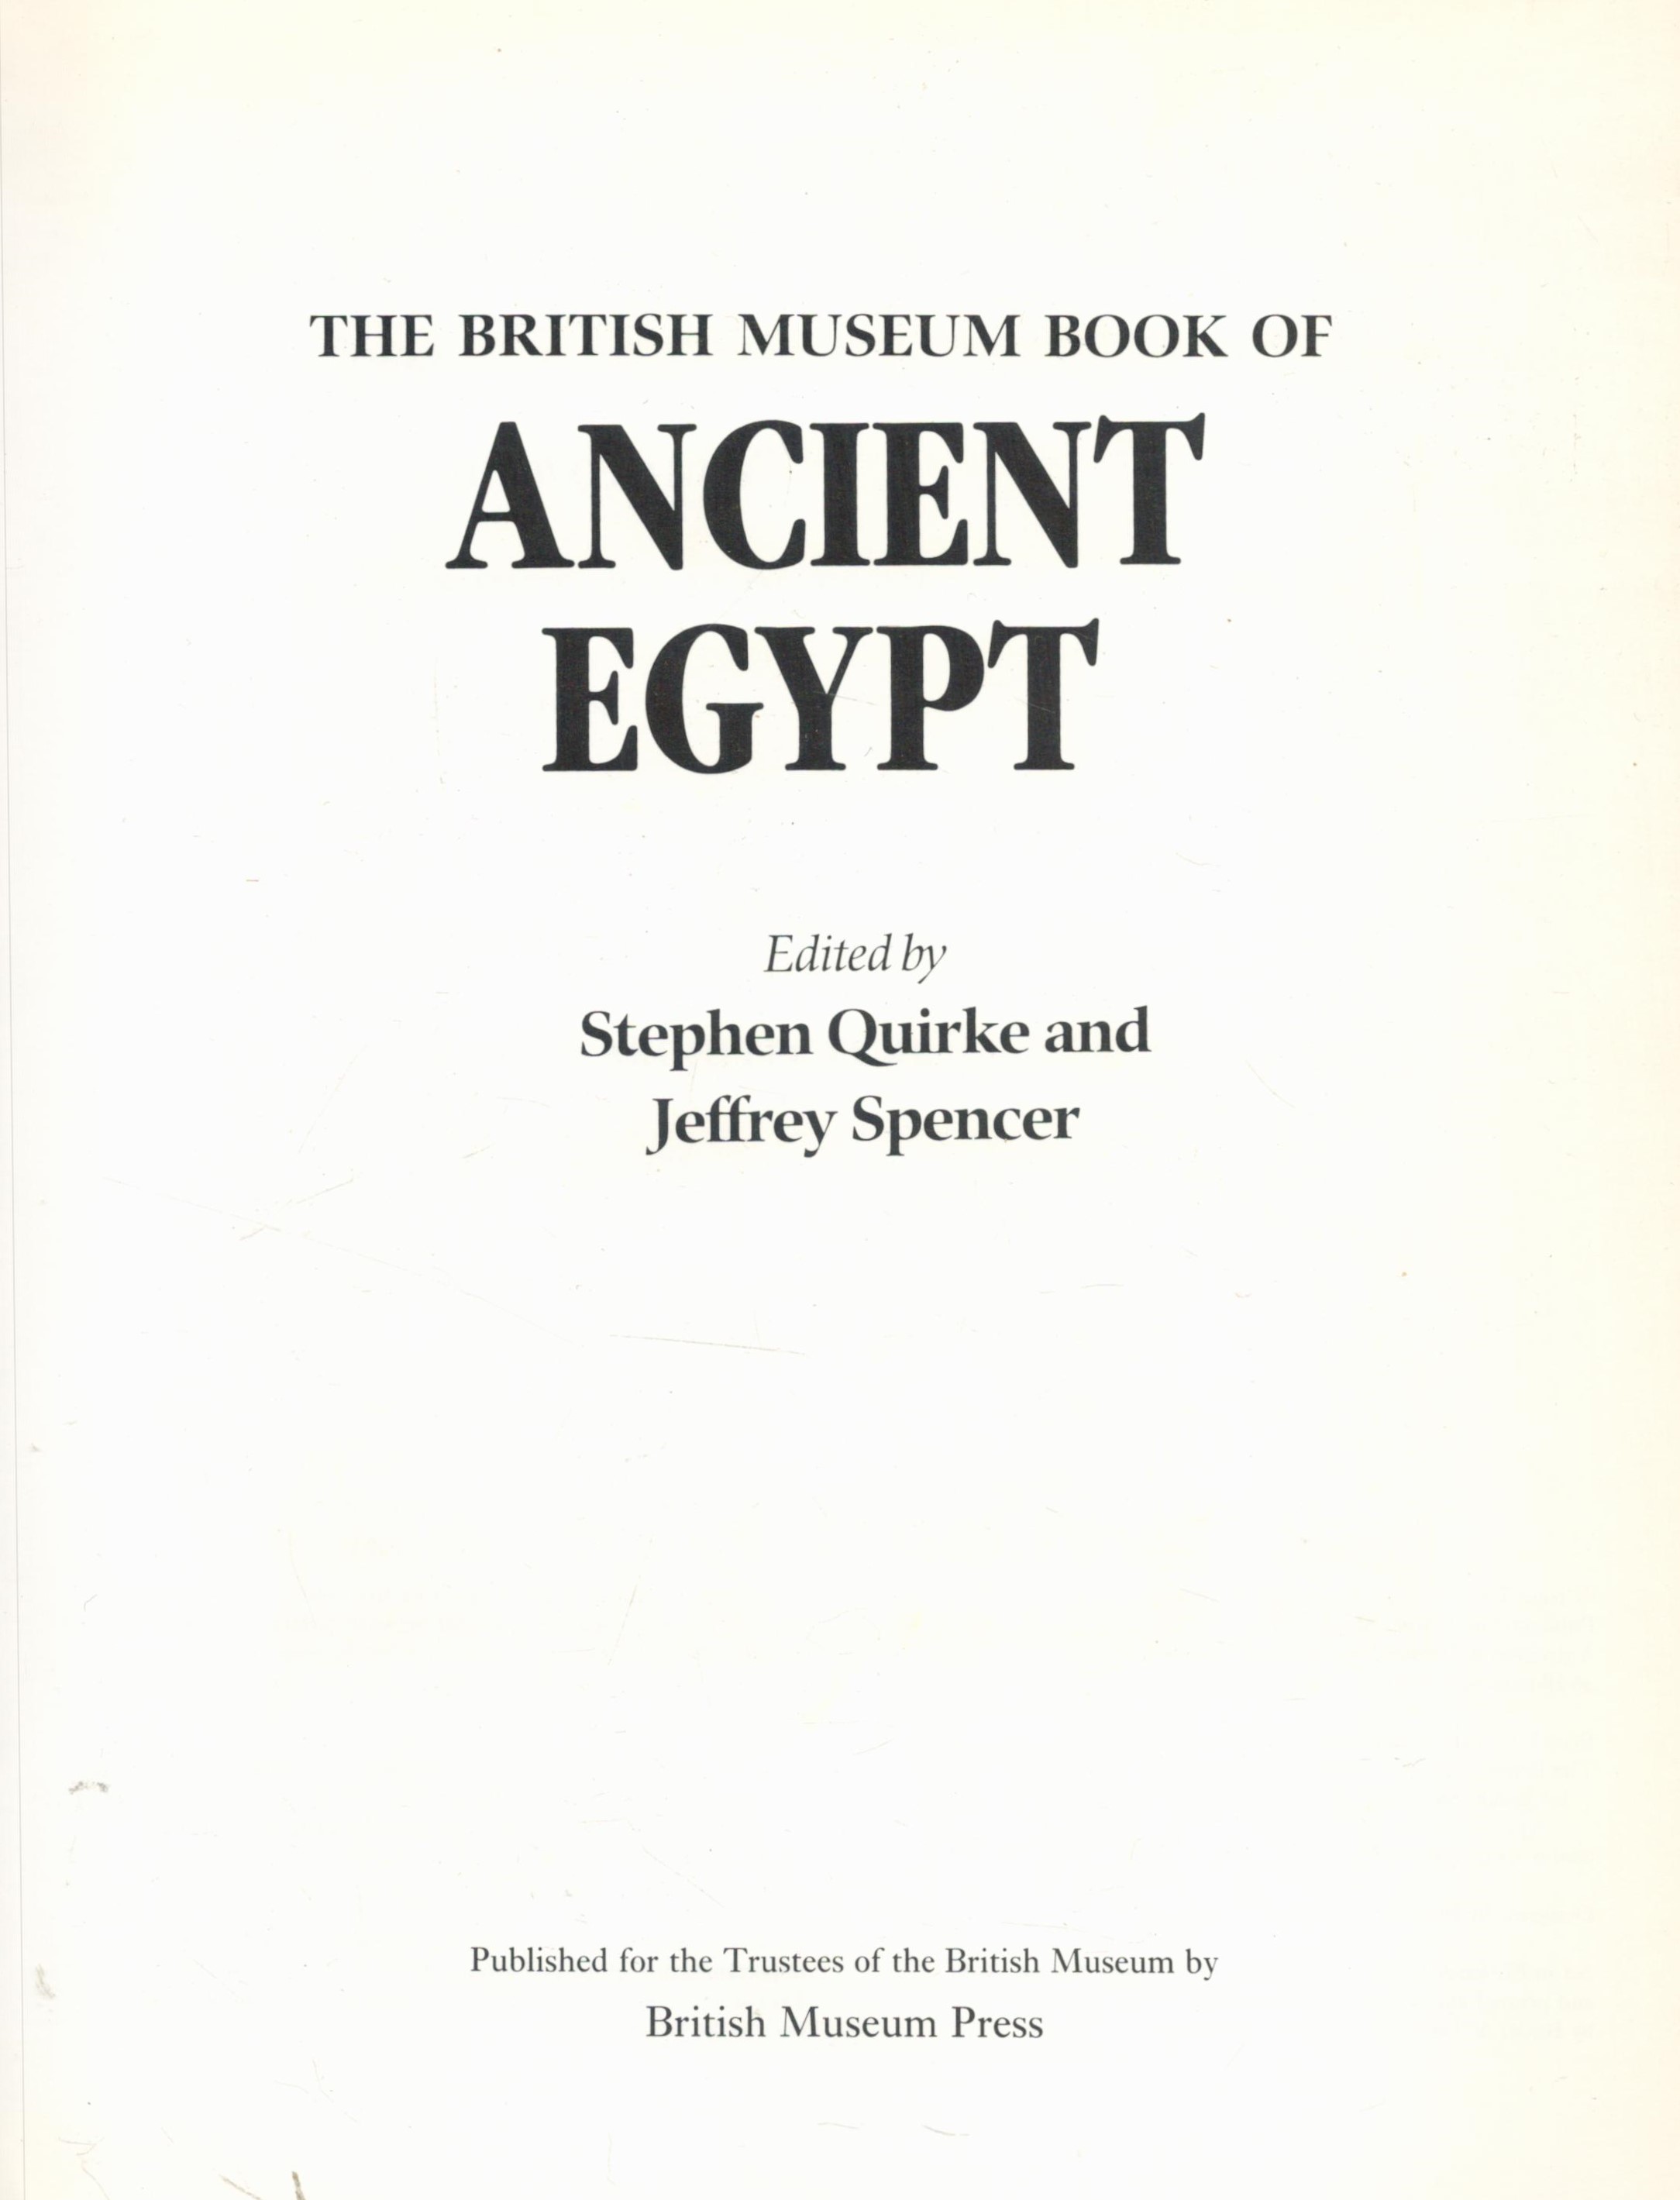 The British Museum Book Of Ancient Egypt Edited by Stephen Quirke and Jeffrey Spencer 1992 First - Image 2 of 3